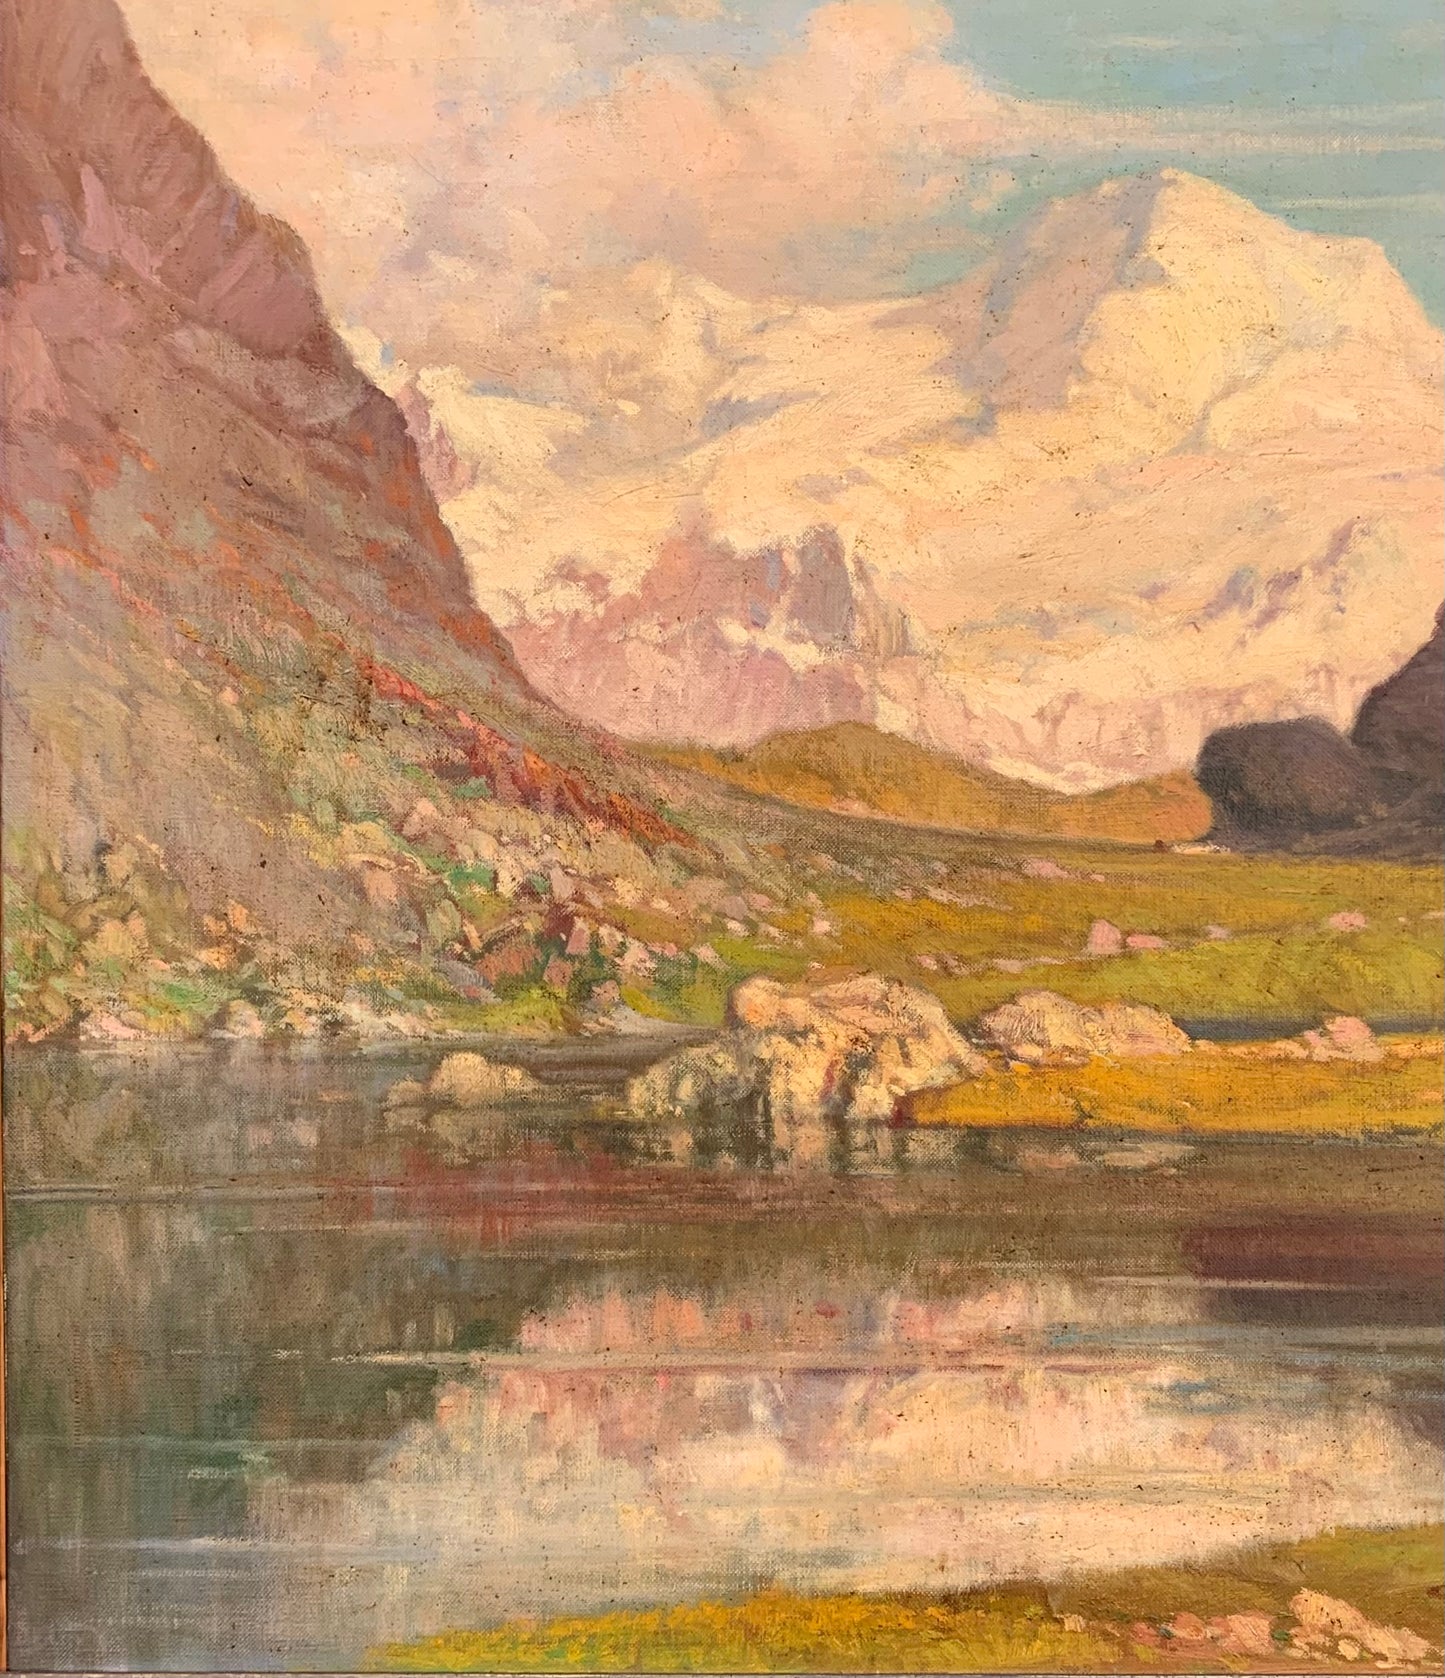 Ligurian Alps landscape with snow-capped peaks tinted by pink light. By Cesare Bentivoglio (Genoa,1868-1952)